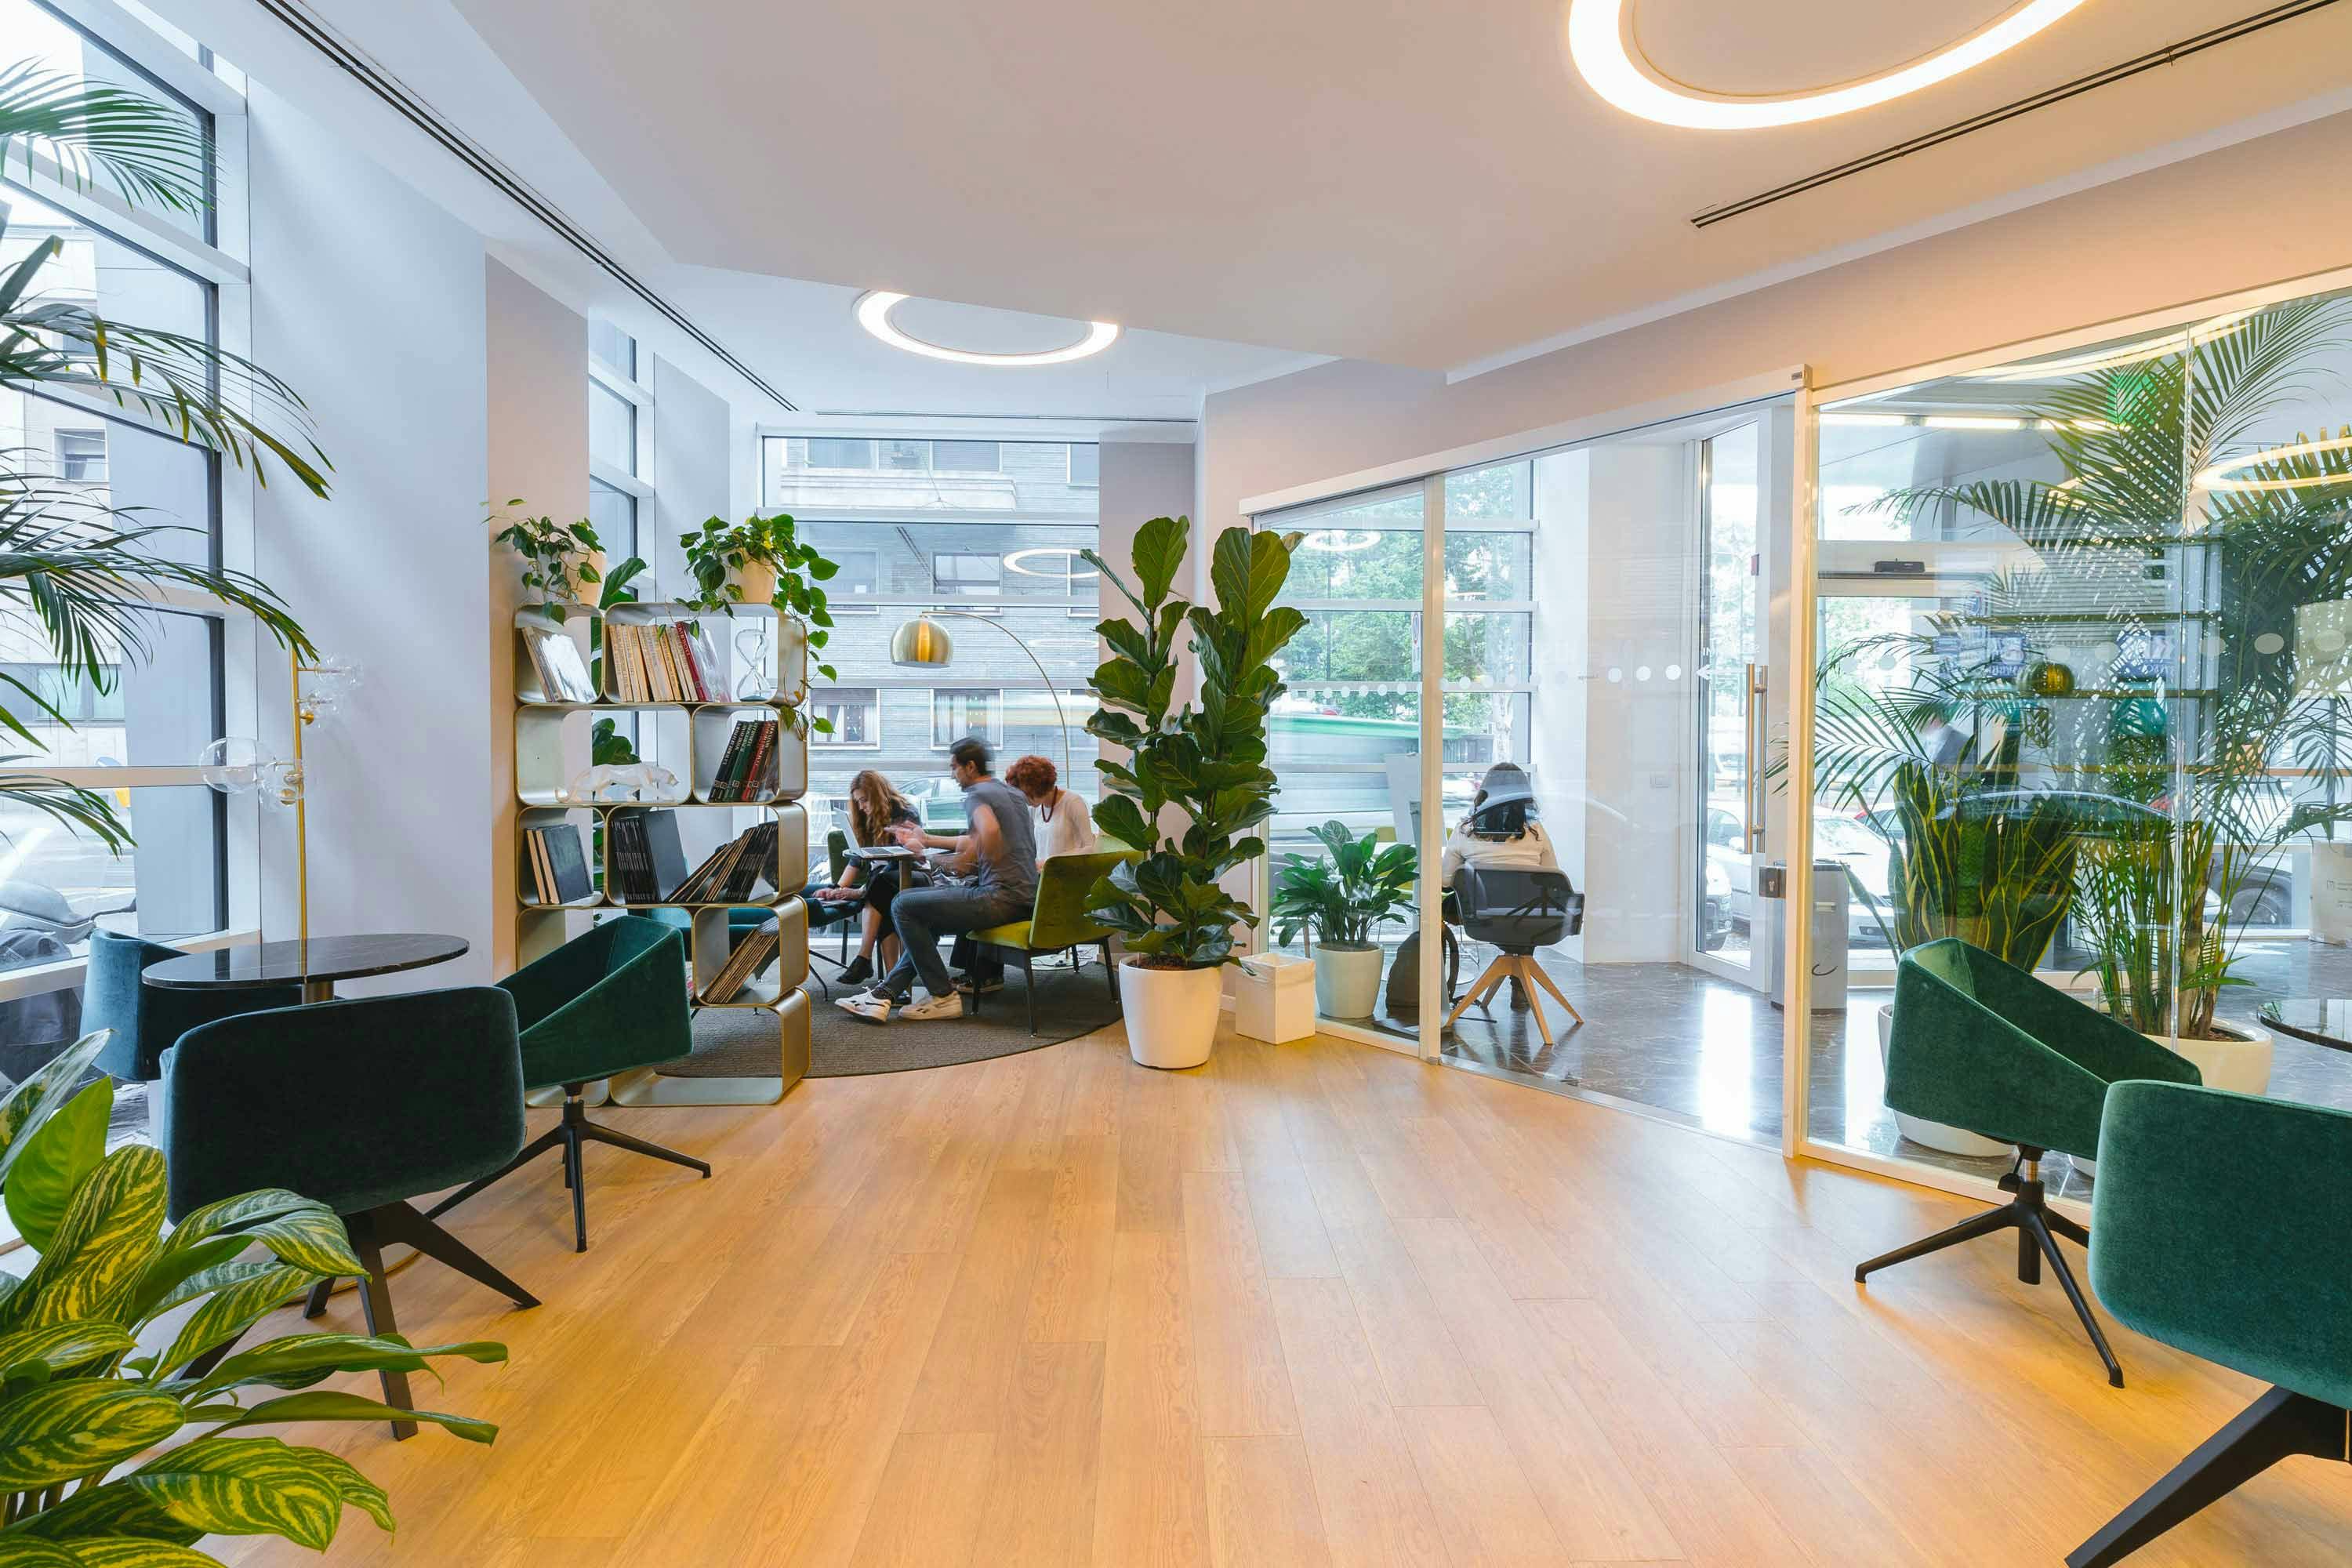 We connect forward-thinking teams to new offices